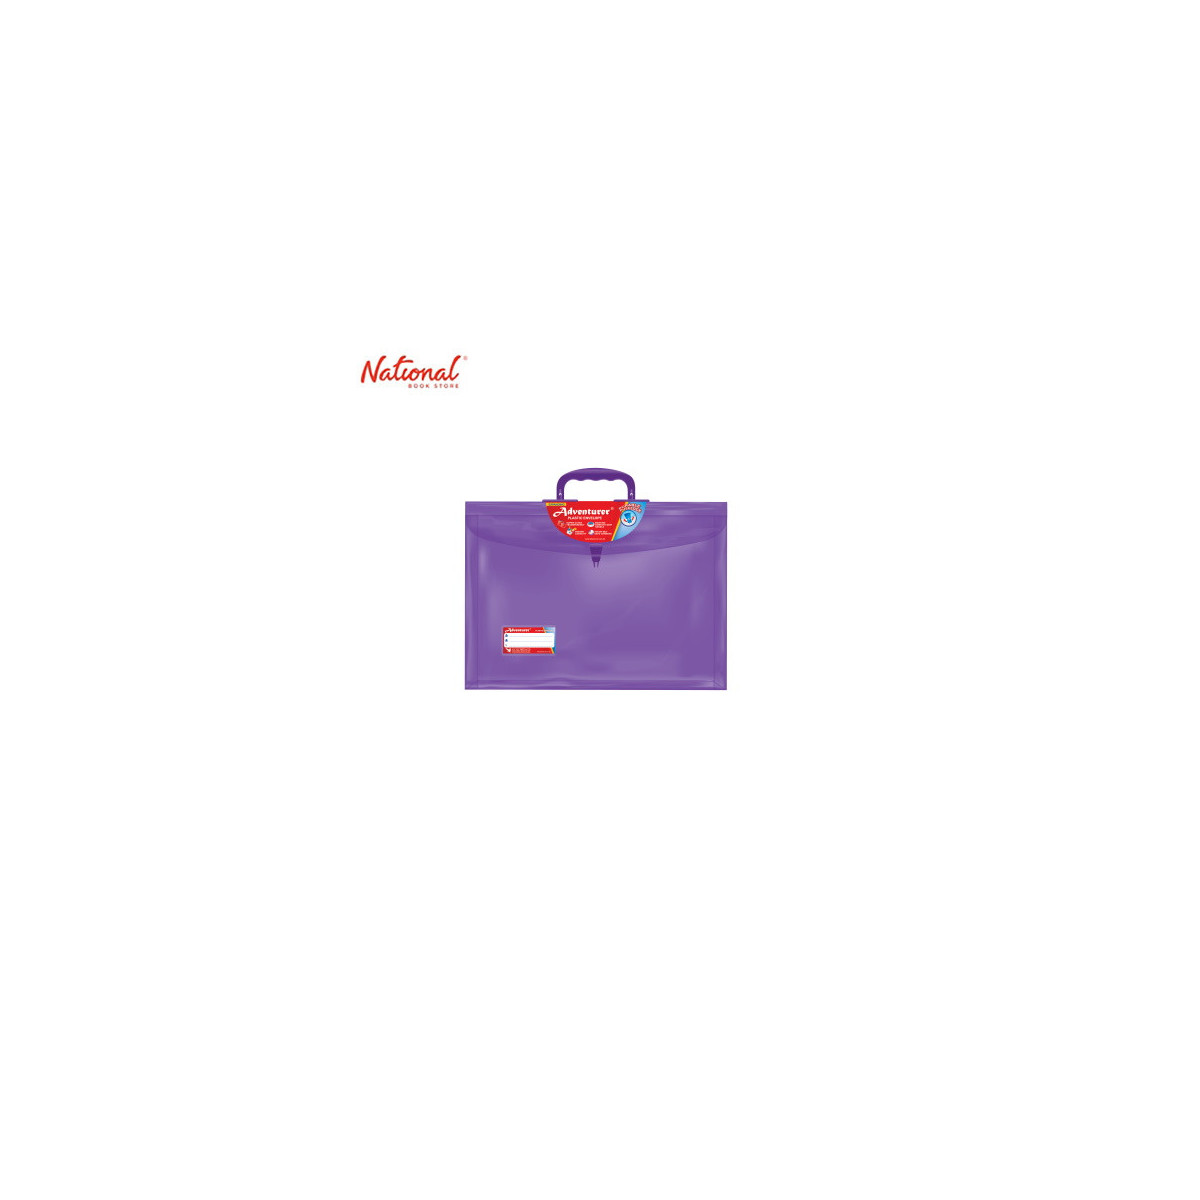 ADVENTURER PLASTIC ENVELOPE EXPANDING WITH HANDLE E19LWH  LONG PUSH LOCK COLORED SMOKE TYPE, VIOLET